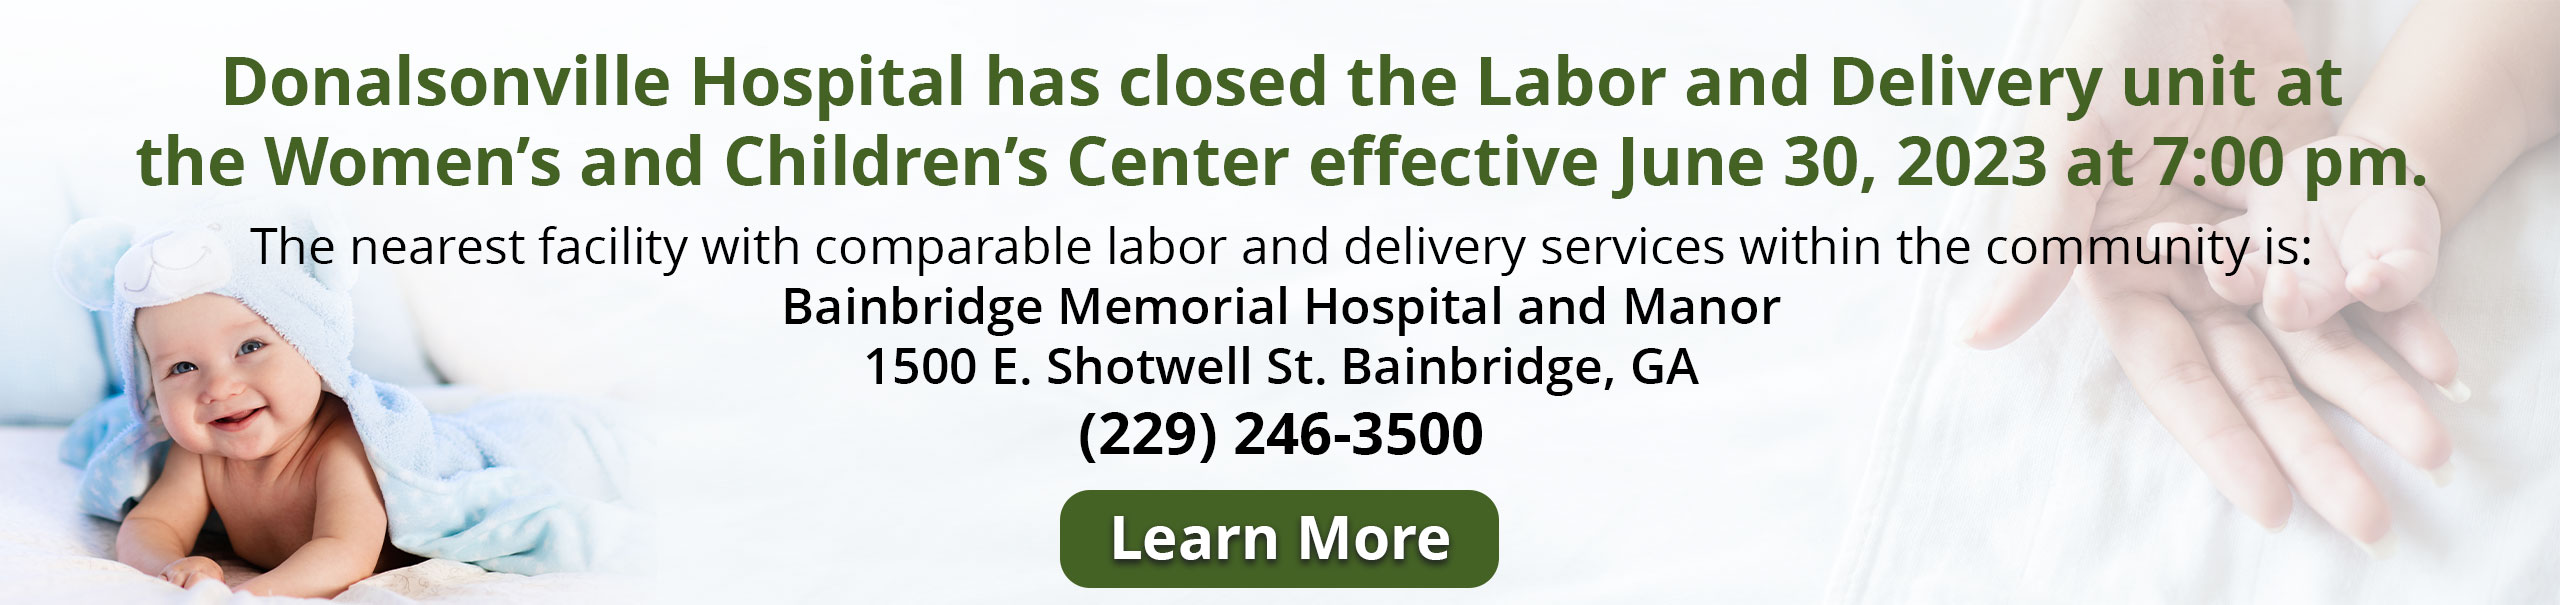 Donalsonville Hospital will be closing the Labor and Delivery unit at the Women’s and Children’s Center effective June 30, 2023 at 7:00 pm.

The nearest facility with comparable labor and delivery services within the community is:
Bainbridge Memorial Hospital and Manor
1500 E. Shotwell St. Bainbridge, GA
(229) 246-3500

Learn More by clicking here